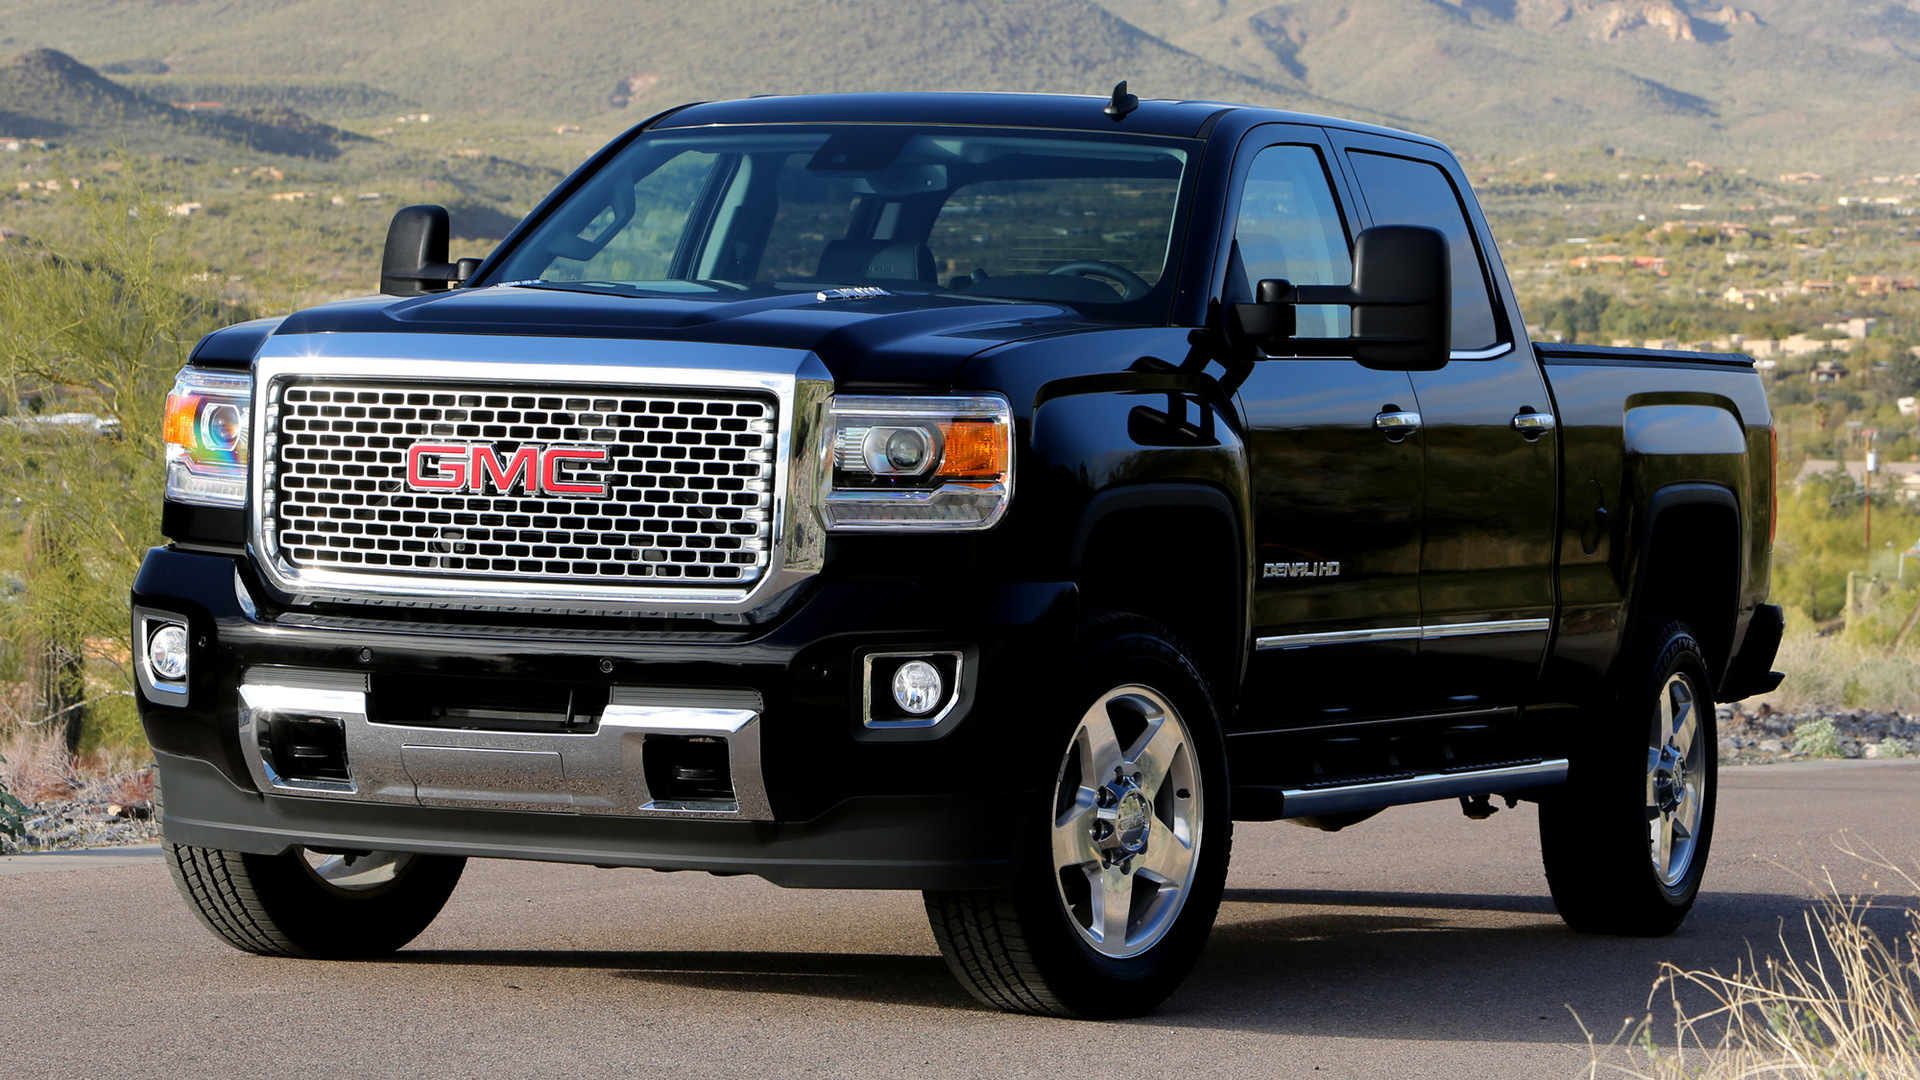 2015 Gmc Sierra Denali 2500 Hd Crew Cab Wallpapers And Hd Images